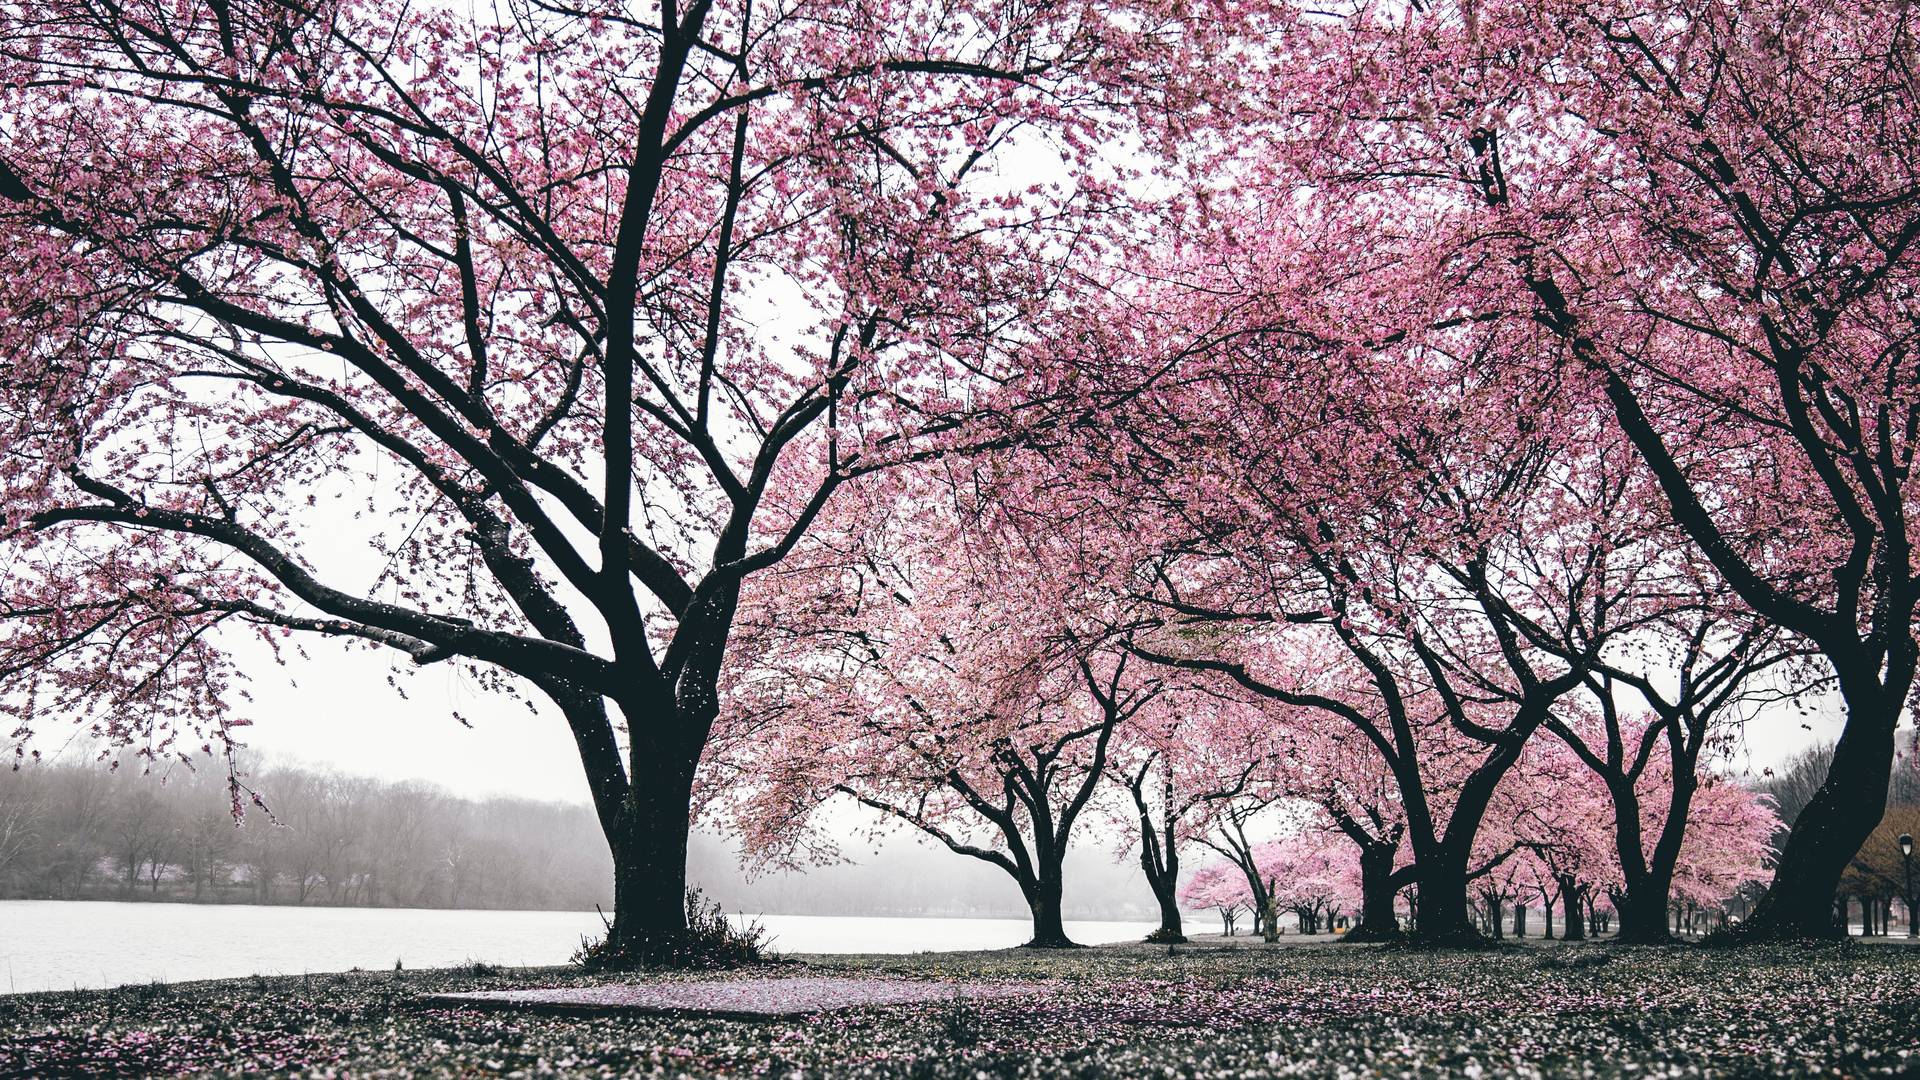 A row of cherry blossom trees in bloom, with pink flowers covering the ground - Cherry blossom, cherry